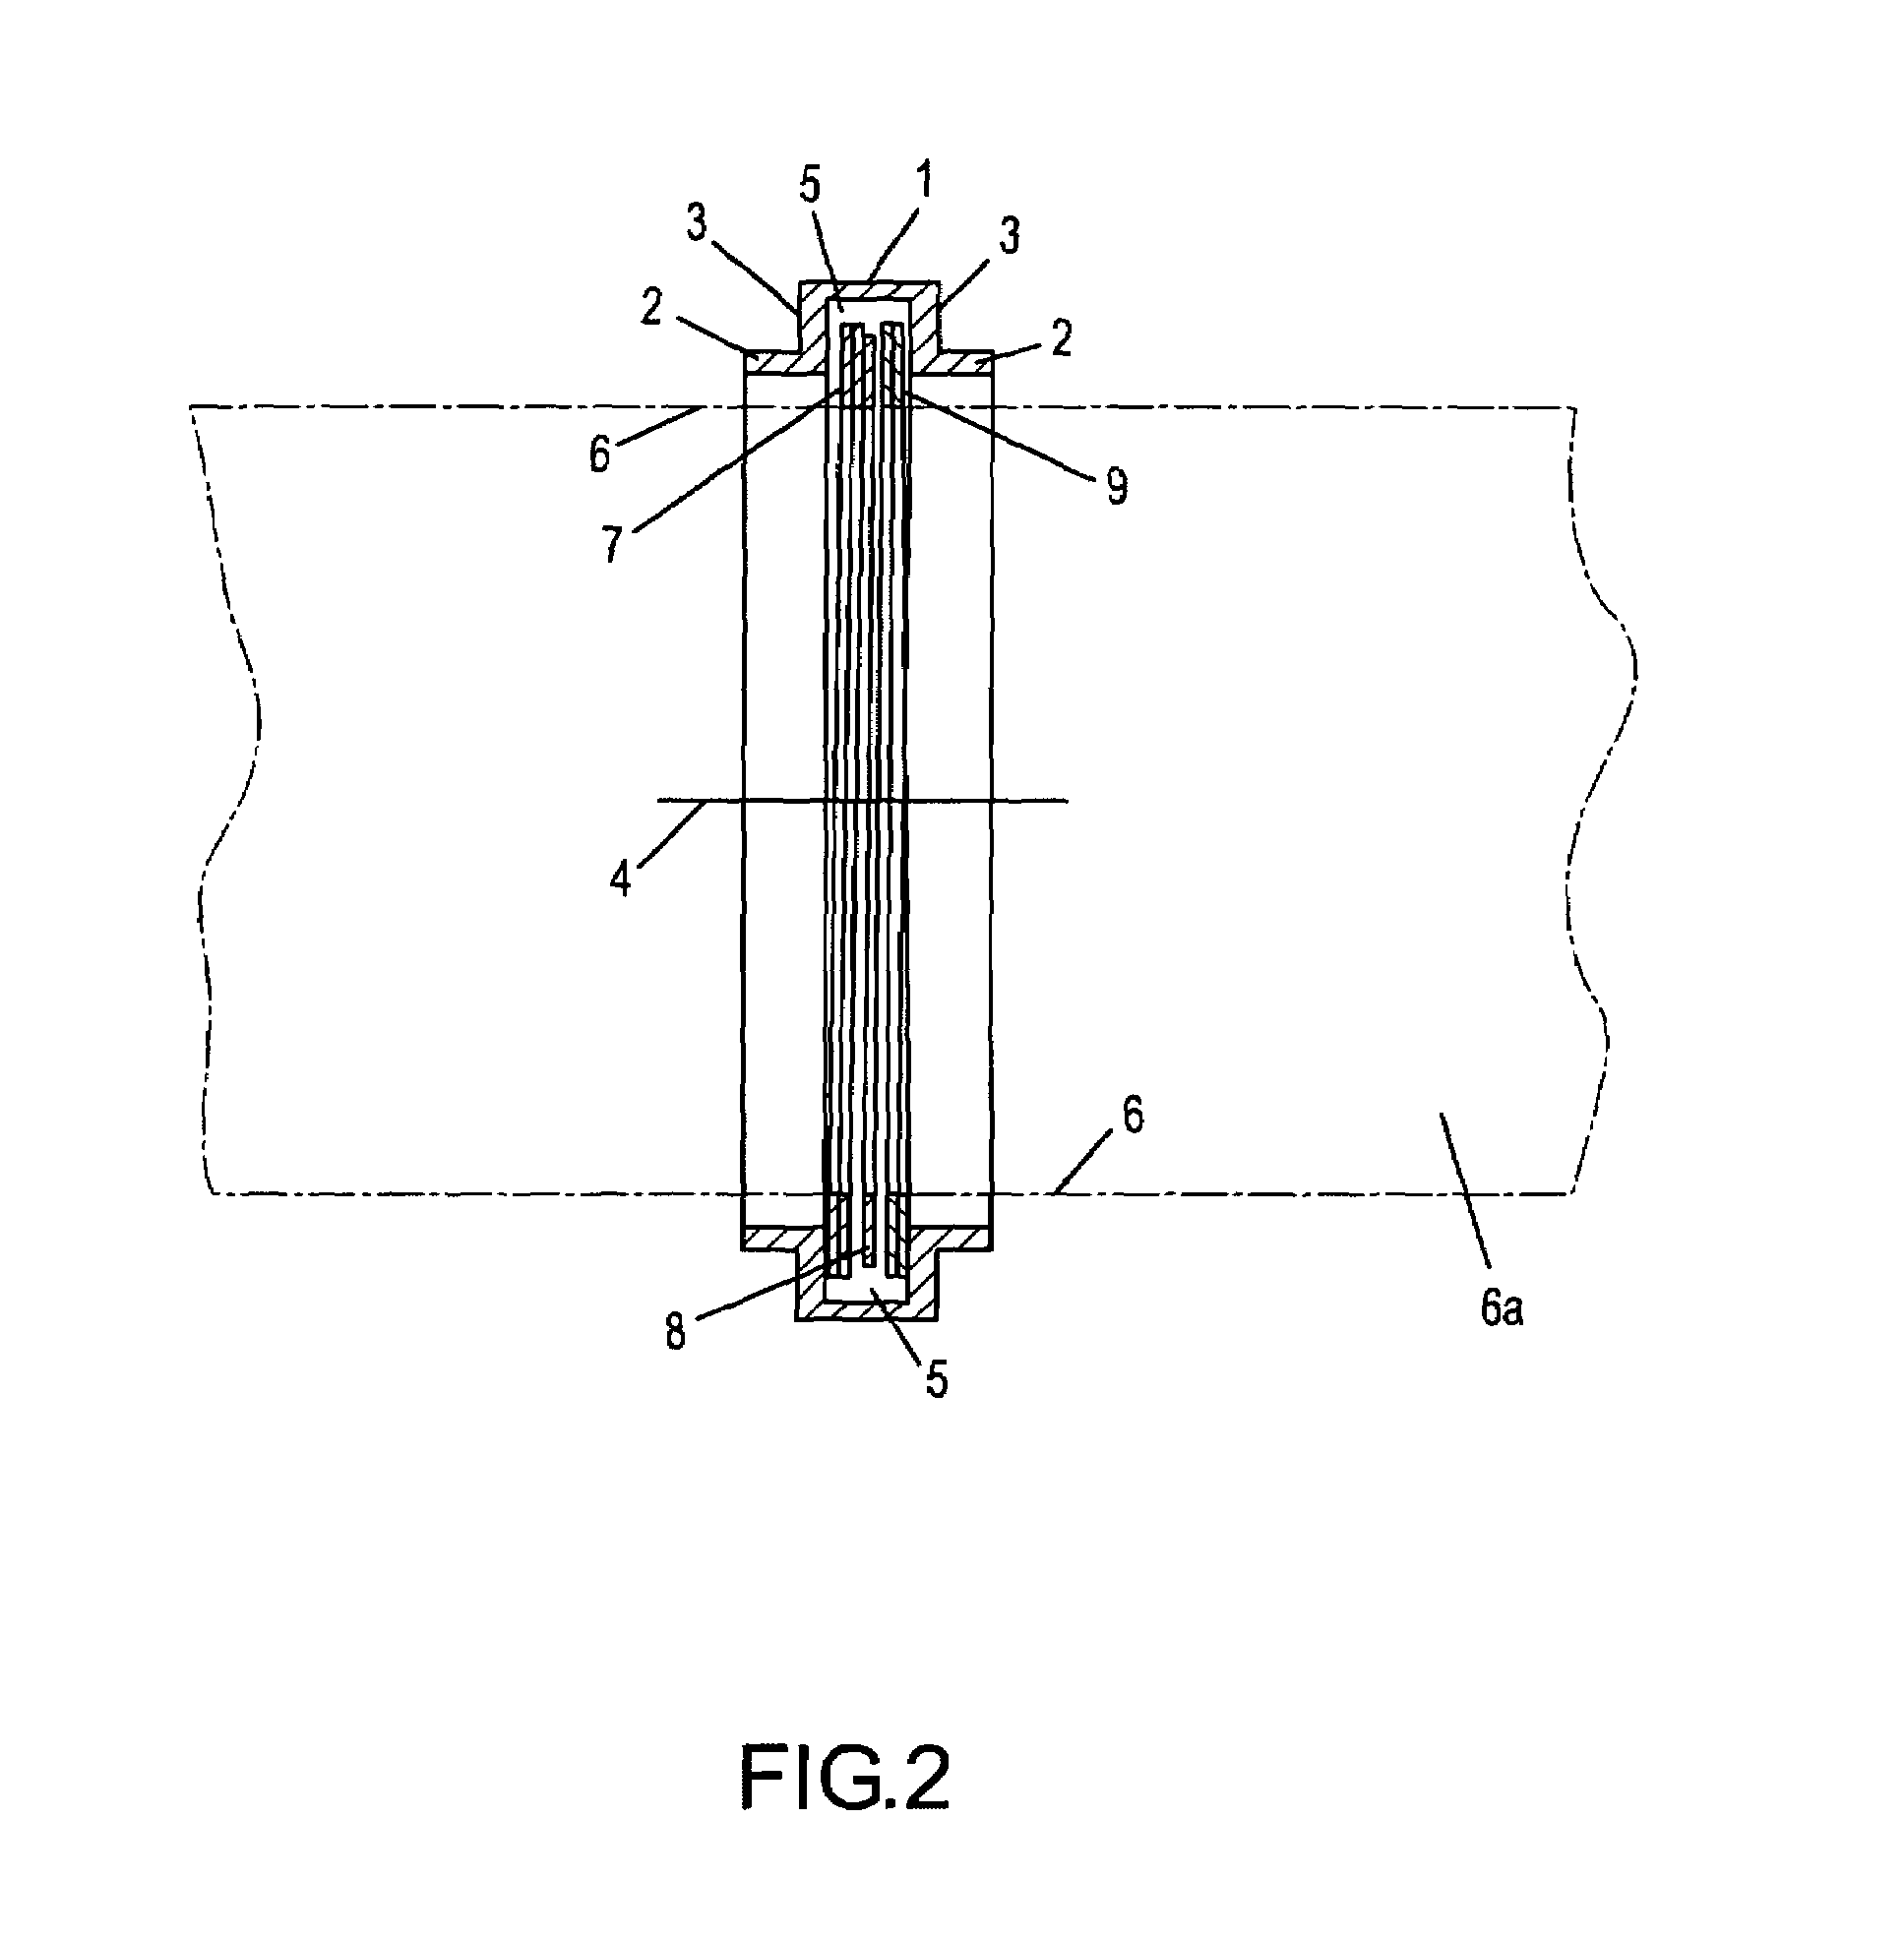 UV-irradiation device for treating fluids, comprising an improved cleaning device